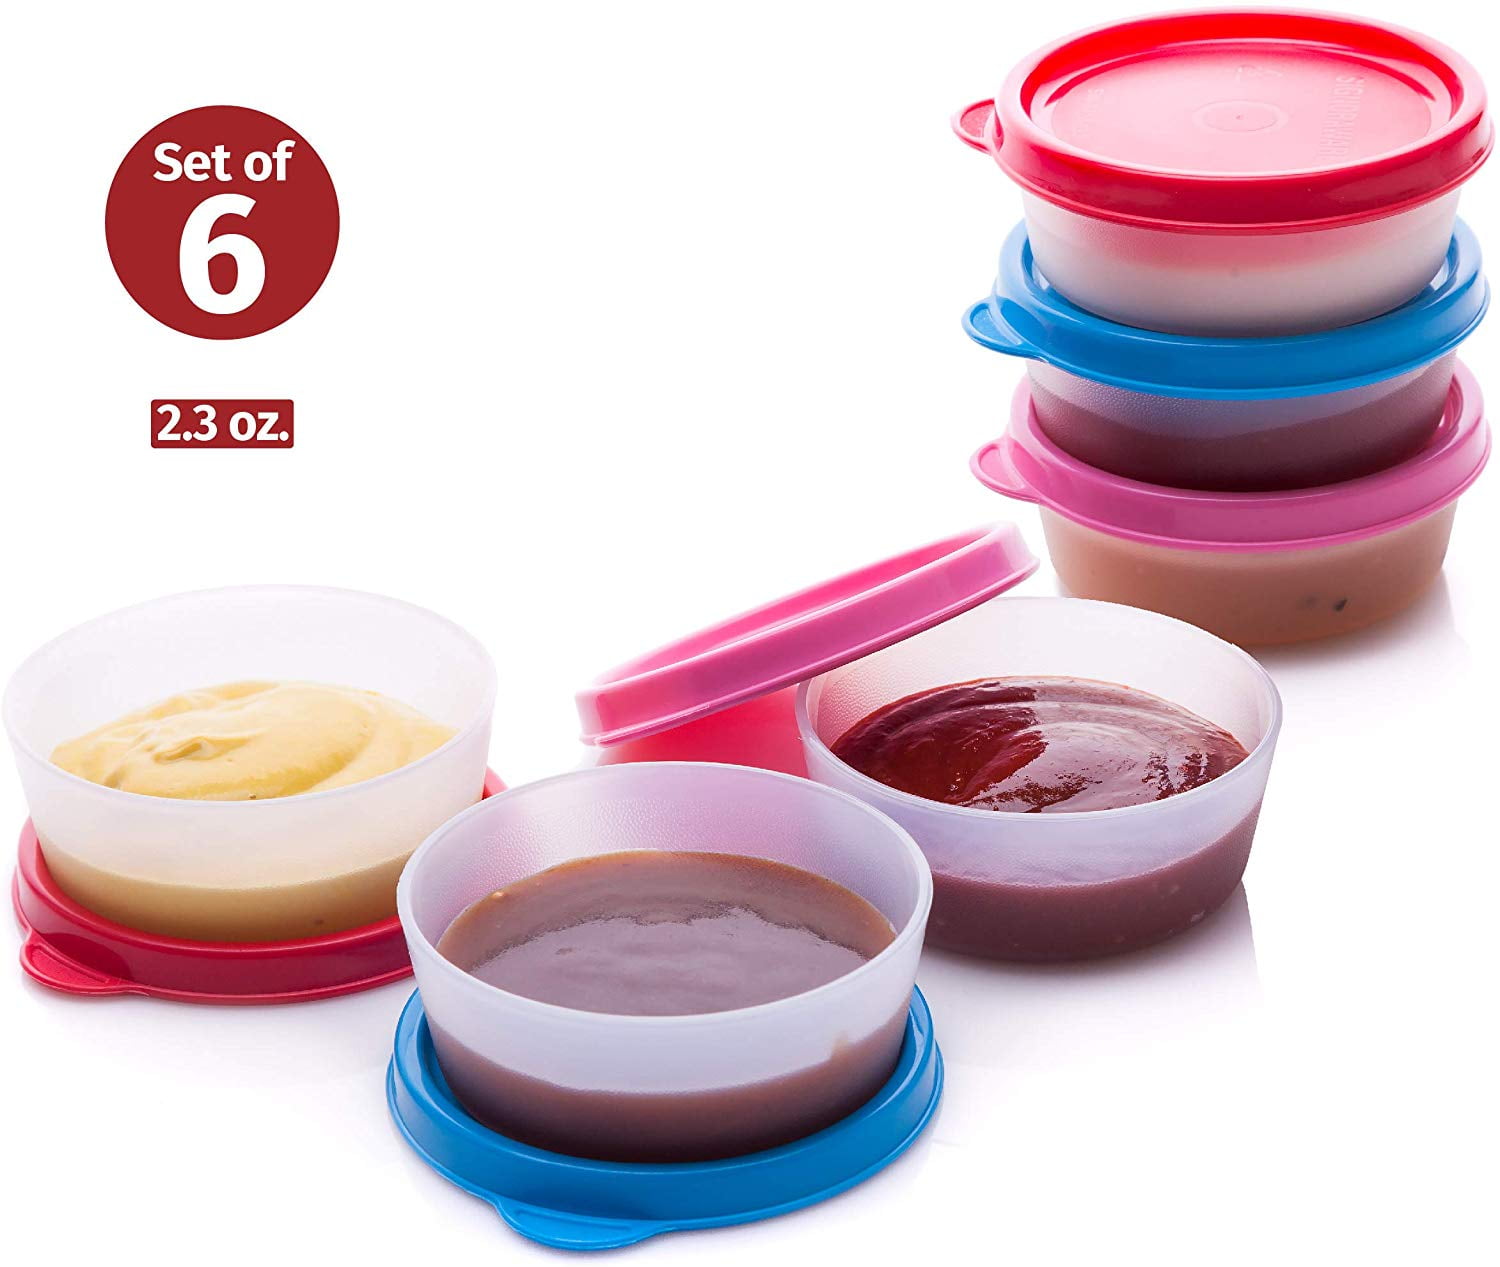 Signora Ware Reusable Airtight Food Prep Storage Containers with Lids, Set  of 6 2.3-oz Mini Mate 